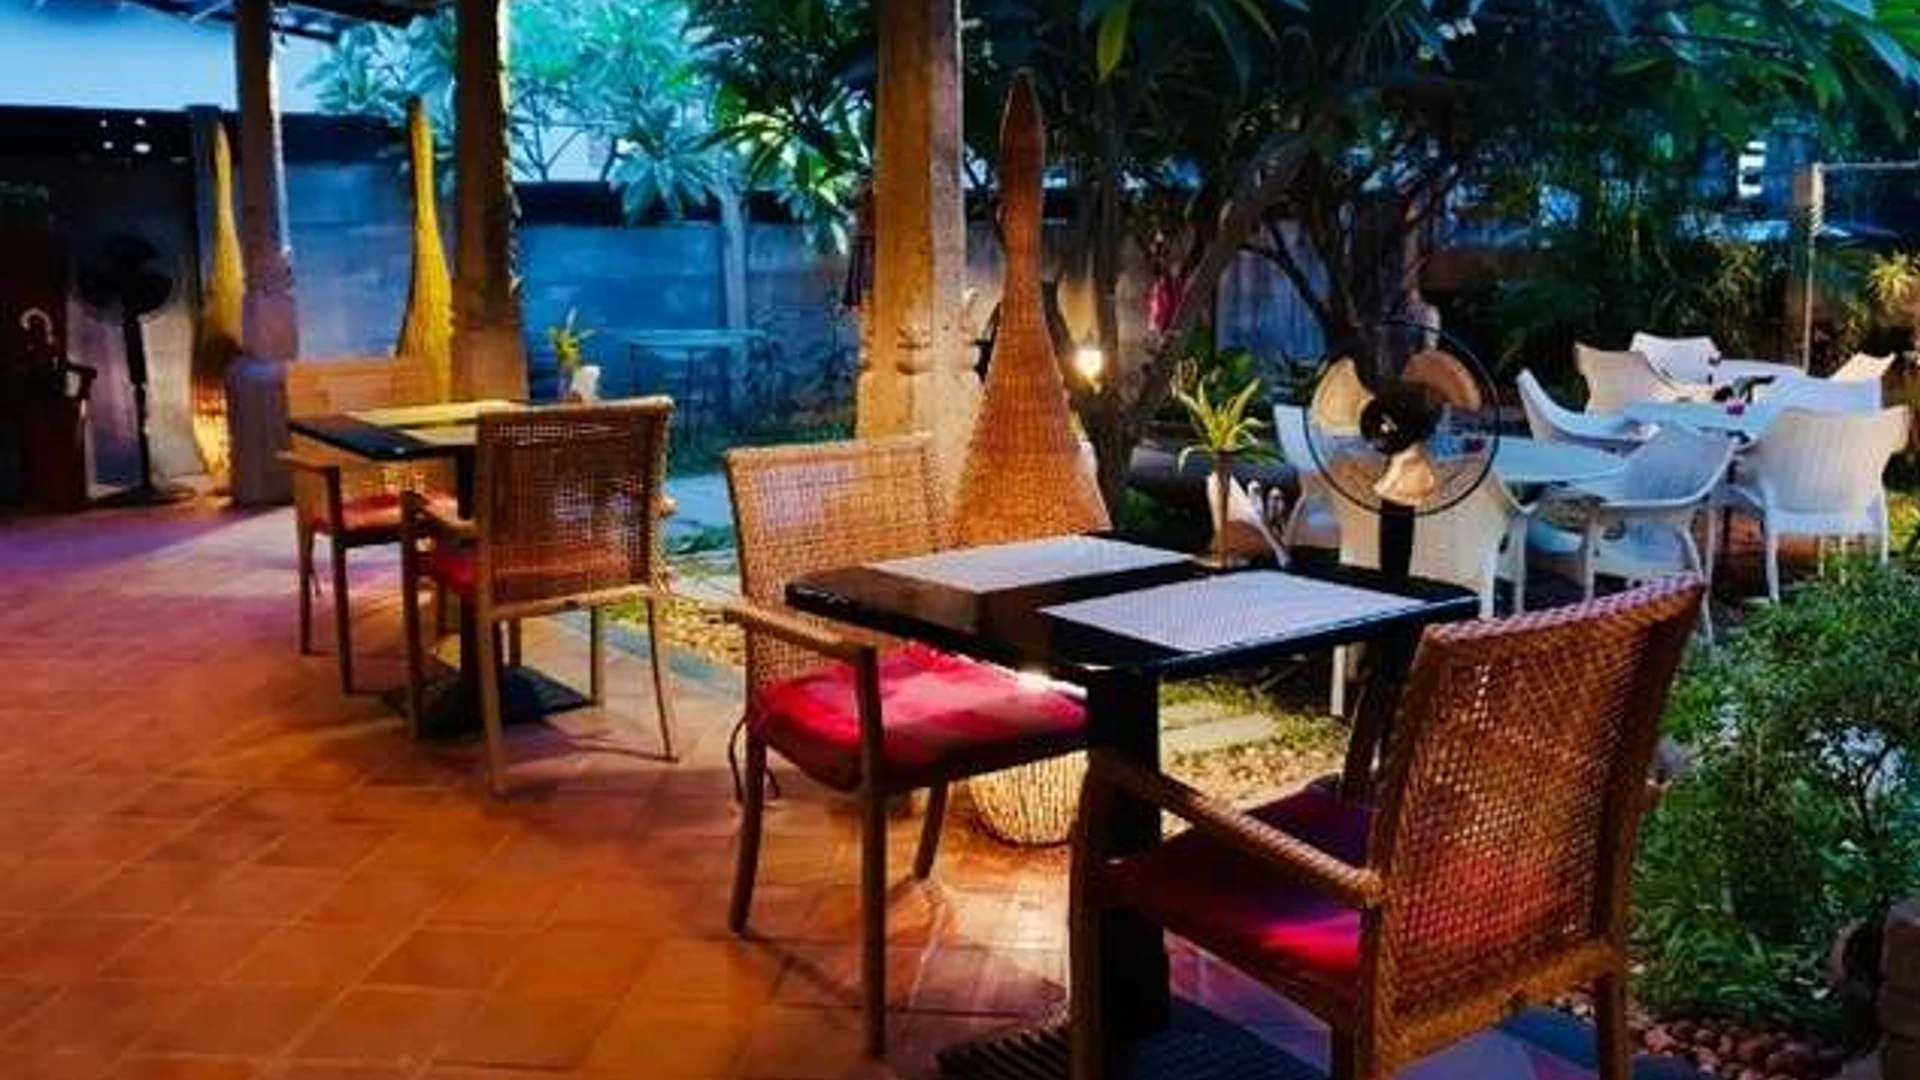 What Are The Best Outdoor Dining Restaurants In Chennai That Celebrate All That’s Wonderful About Al Fresco Dining?